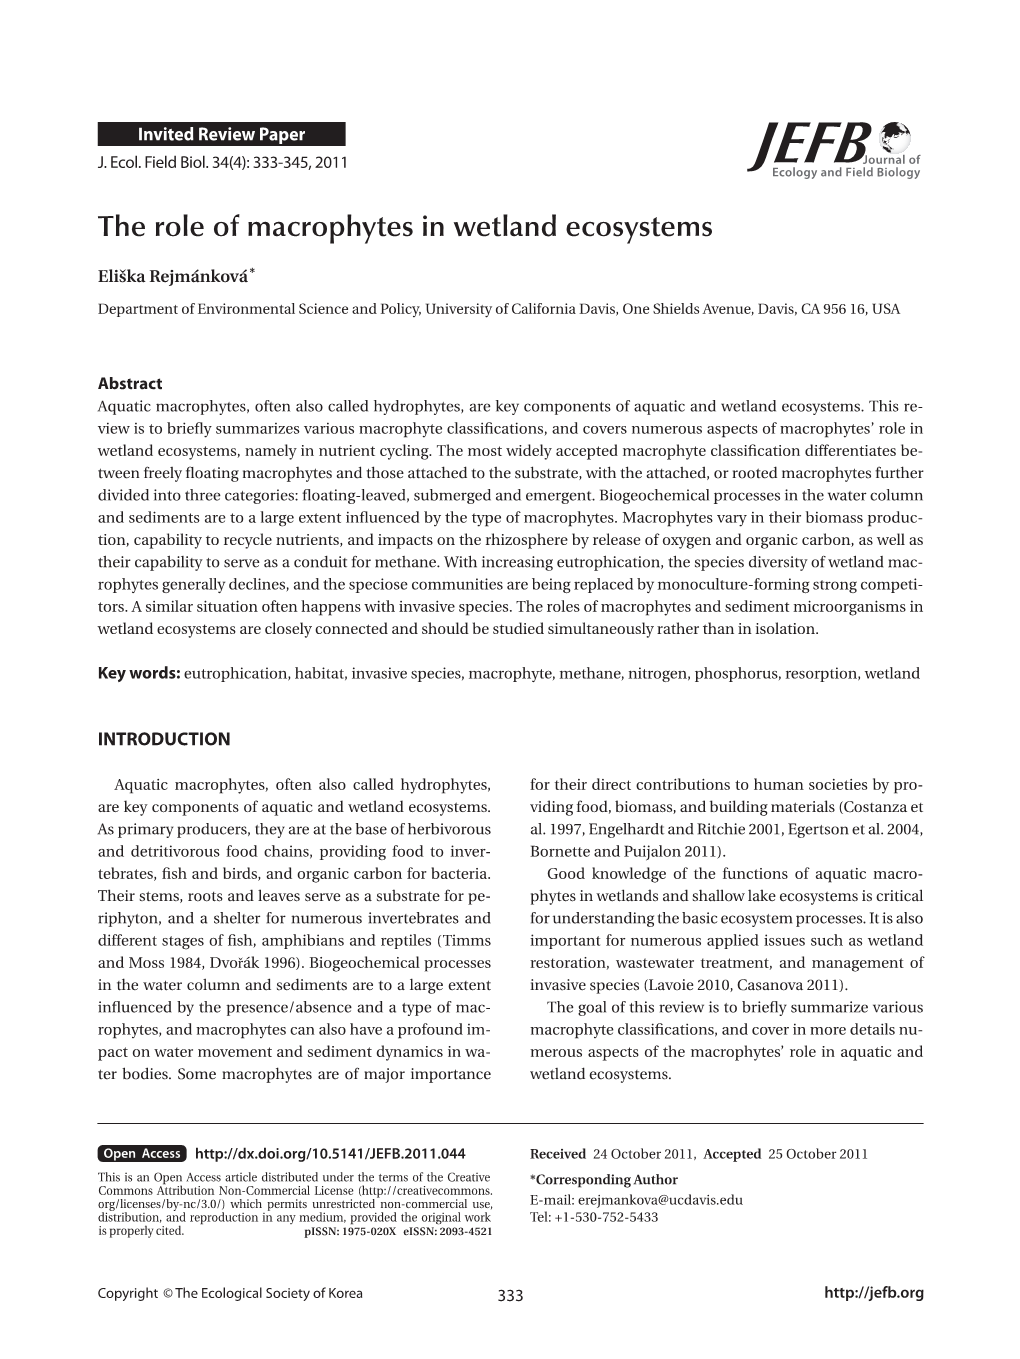 The Role of Macrophytes in Wetland Ecosystems